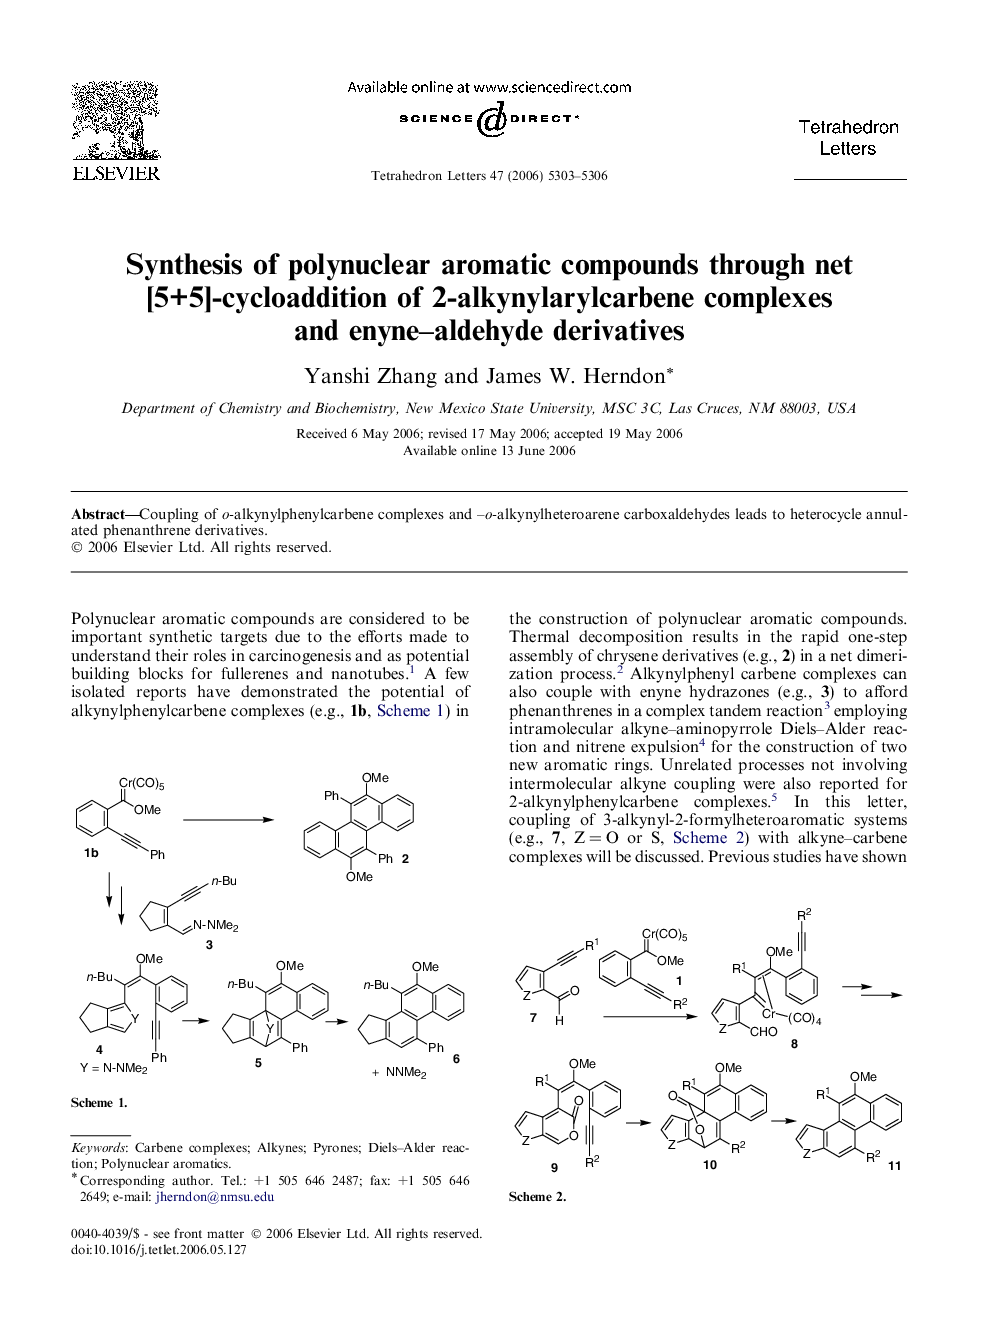 Synthesis of polynuclear aromatic compounds through net [5+5]-cycloaddition of 2-alkynylarylcarbene complexes and enyne-aldehyde derivatives